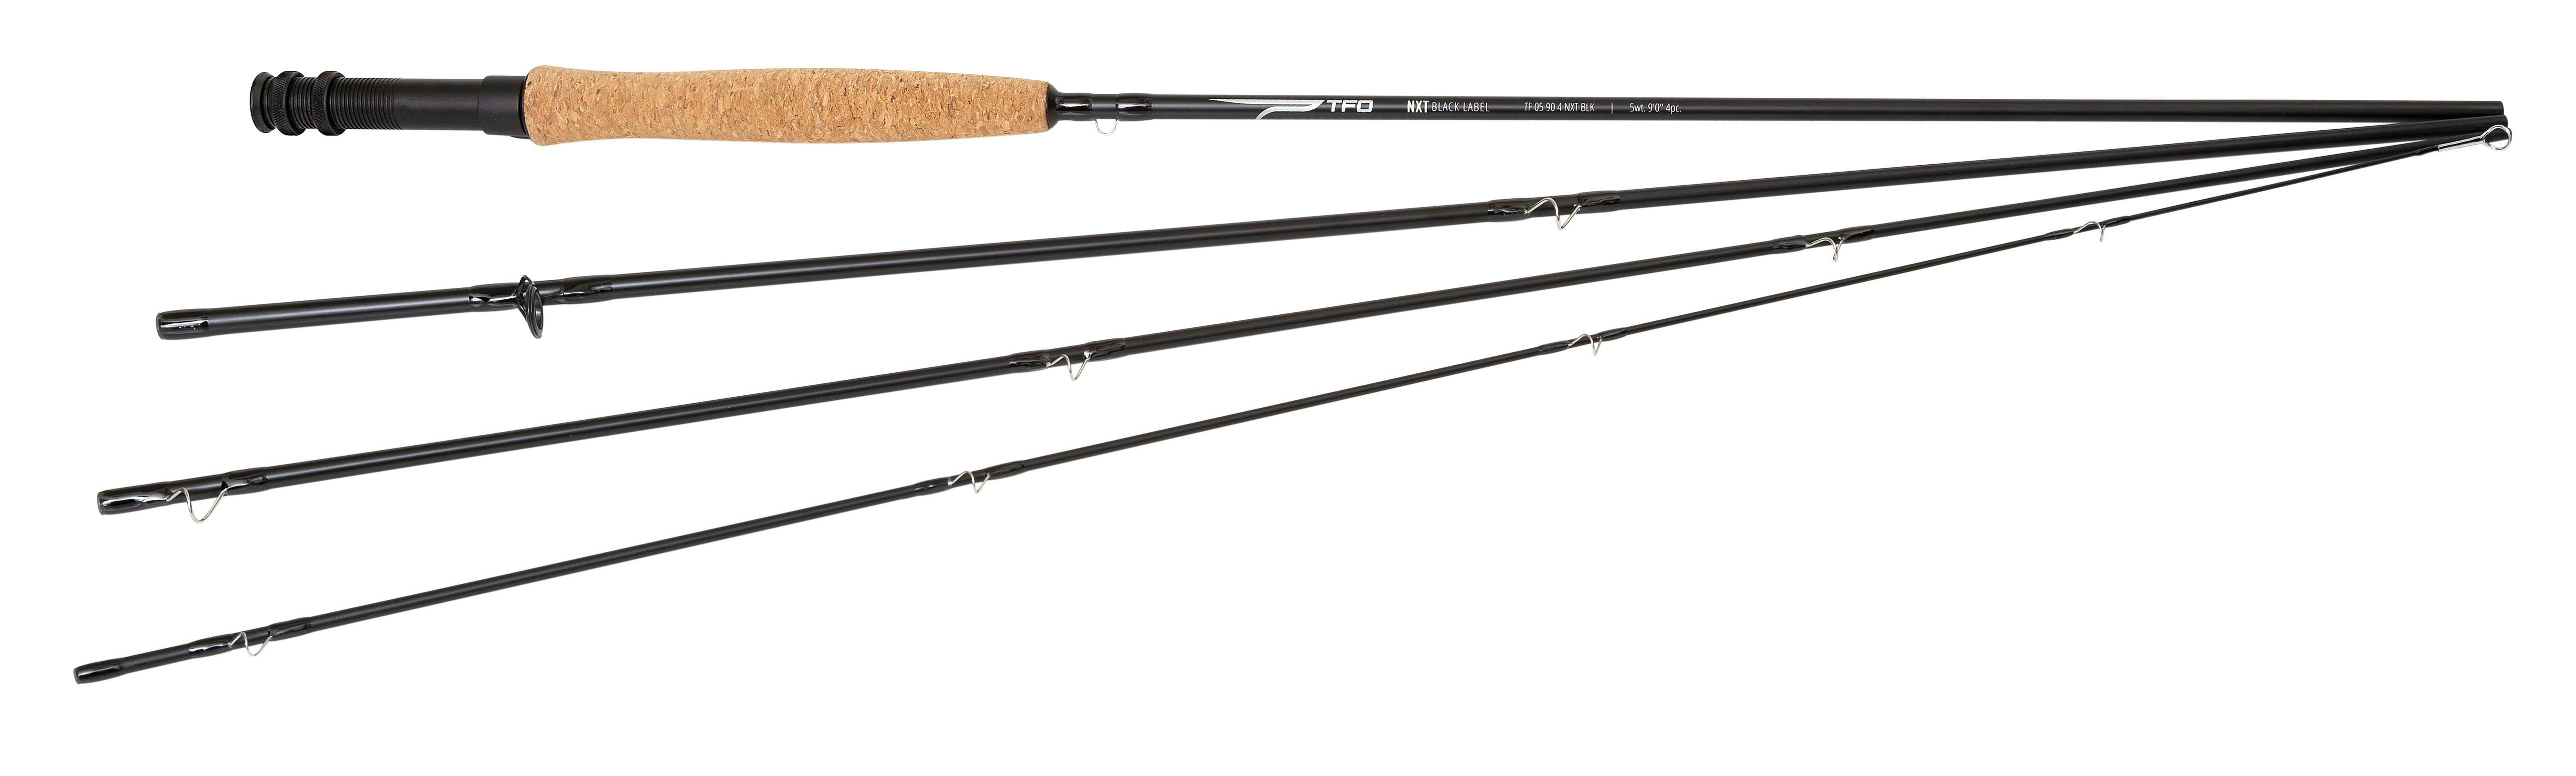 Temple Fork Outfitters NXT Black Label Fly Rod · 9' · 5 wt.